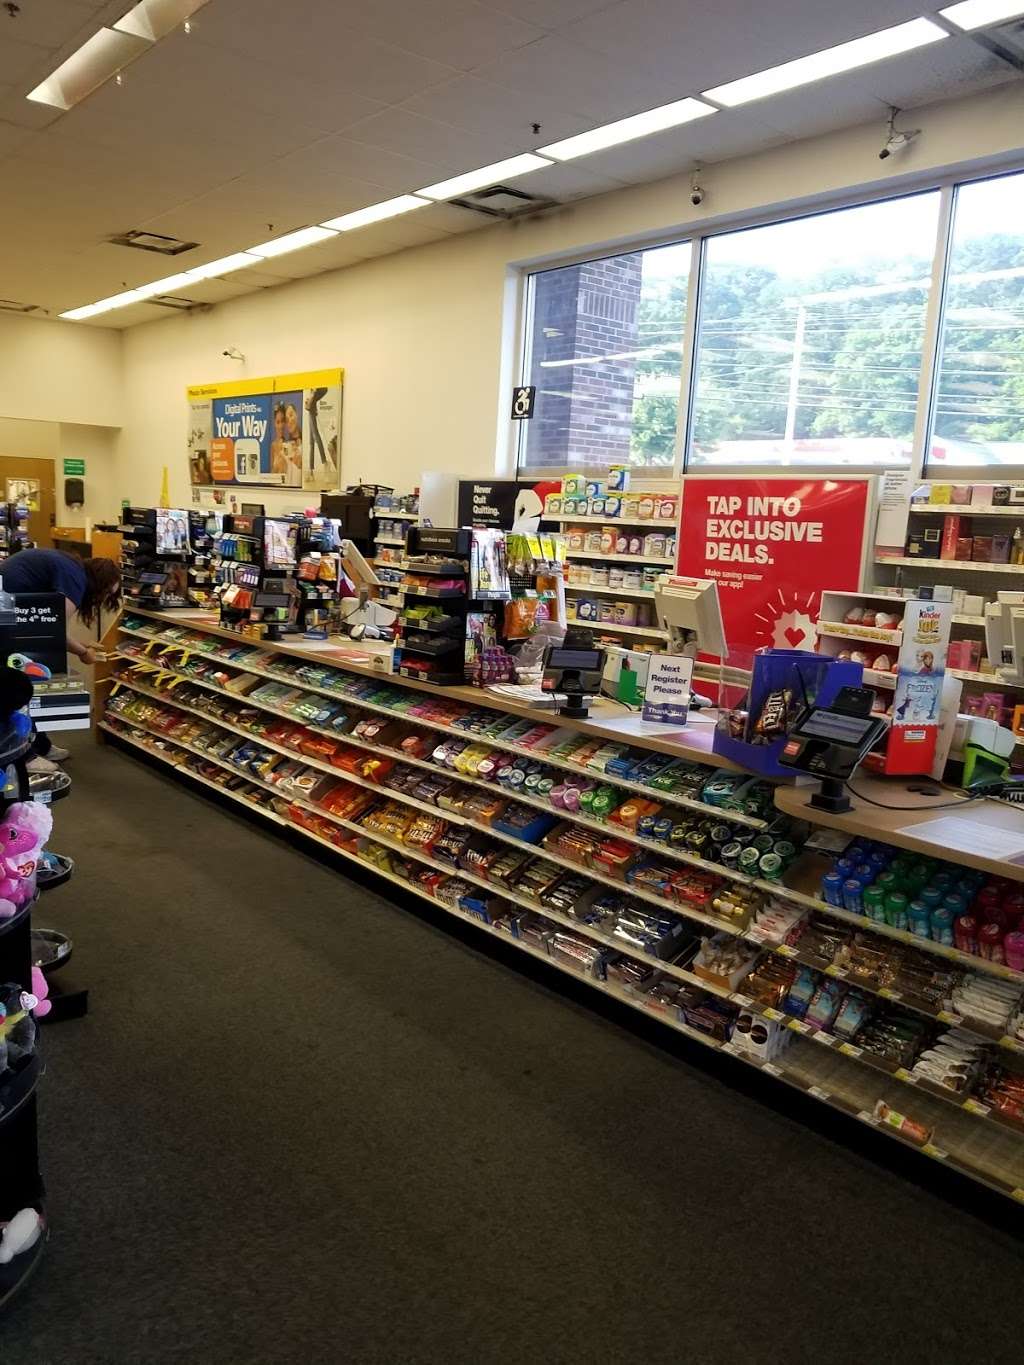 CVS Pharmacy | Route 611 And, Old Mill Rd, Tannersville, PA 18372, USA | Phone: (570) 629-8554